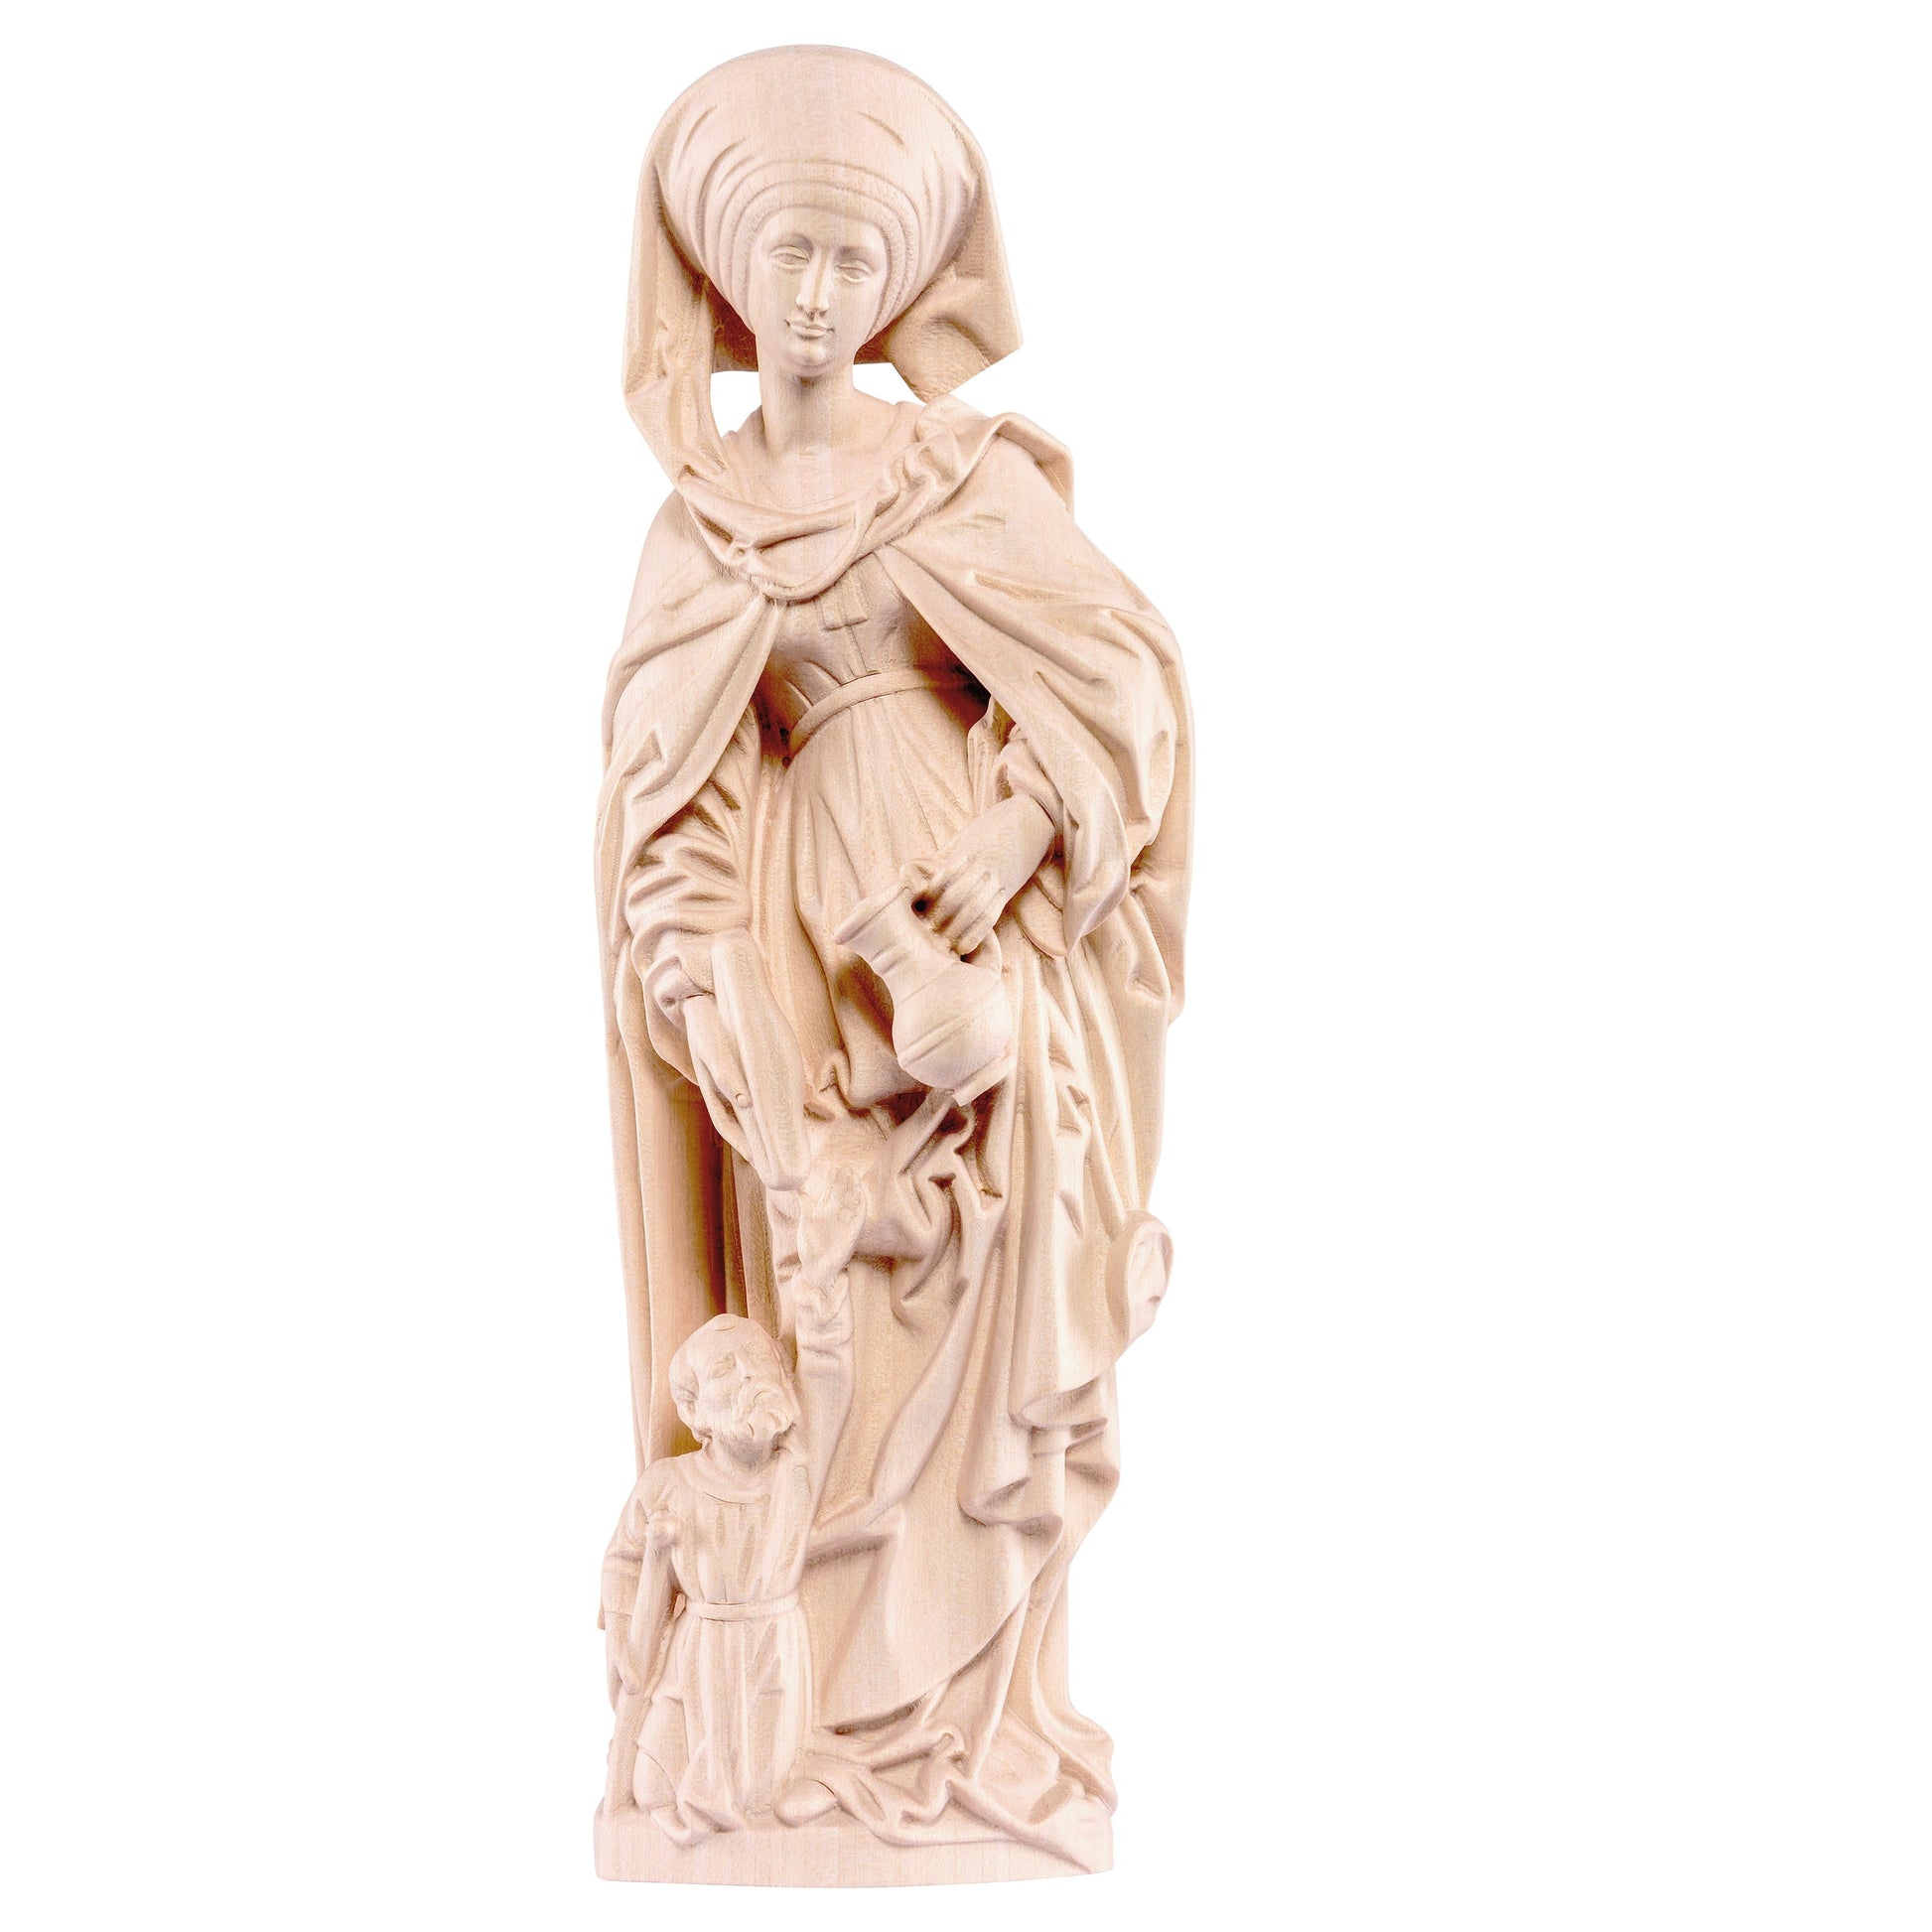 Mondo Cattolico Natural / 40 cm (15.7 in) Wooden statue of St. Elizabeth with beggar